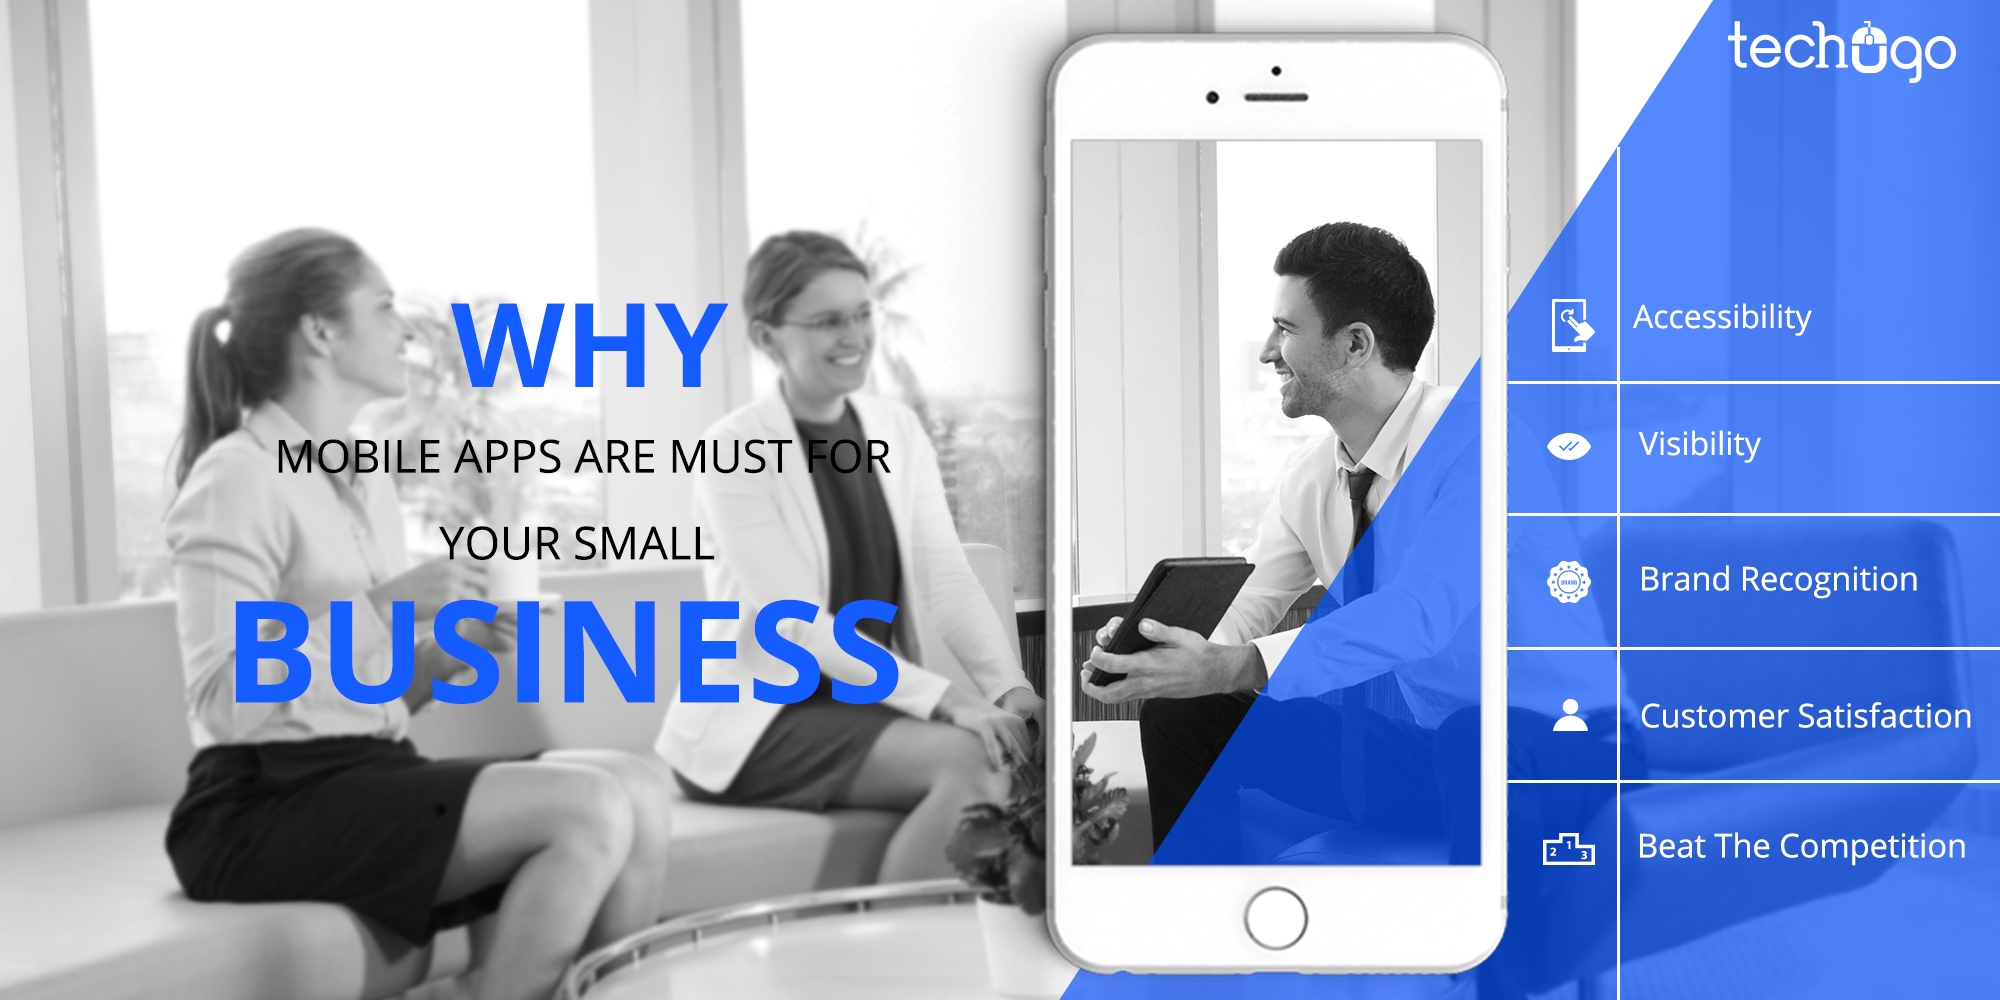 Why Mobile Apps Are Must For Your Small Business